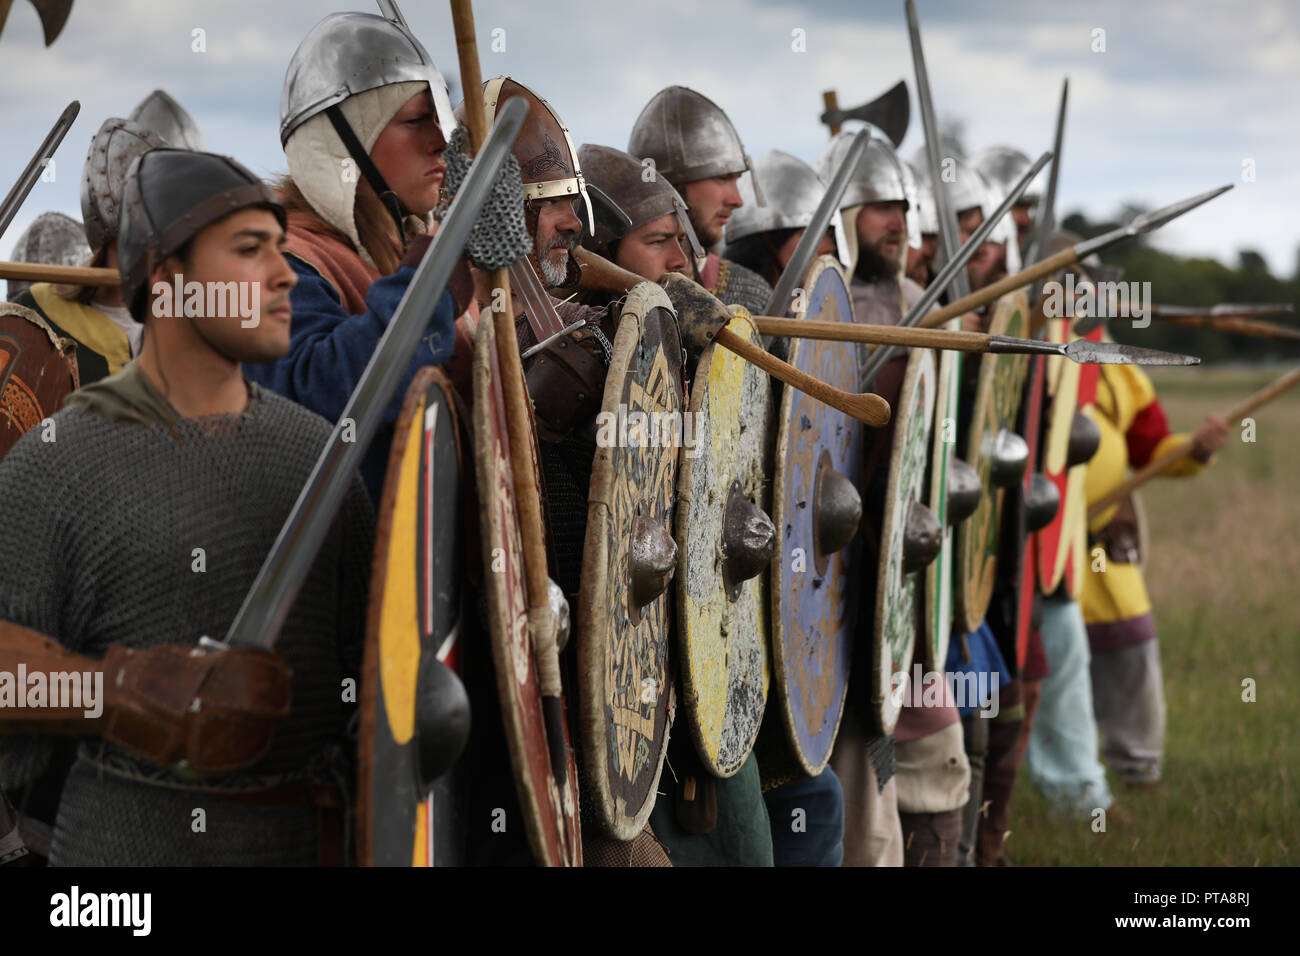 Vikings formed in to a  shield wall Stock Photo